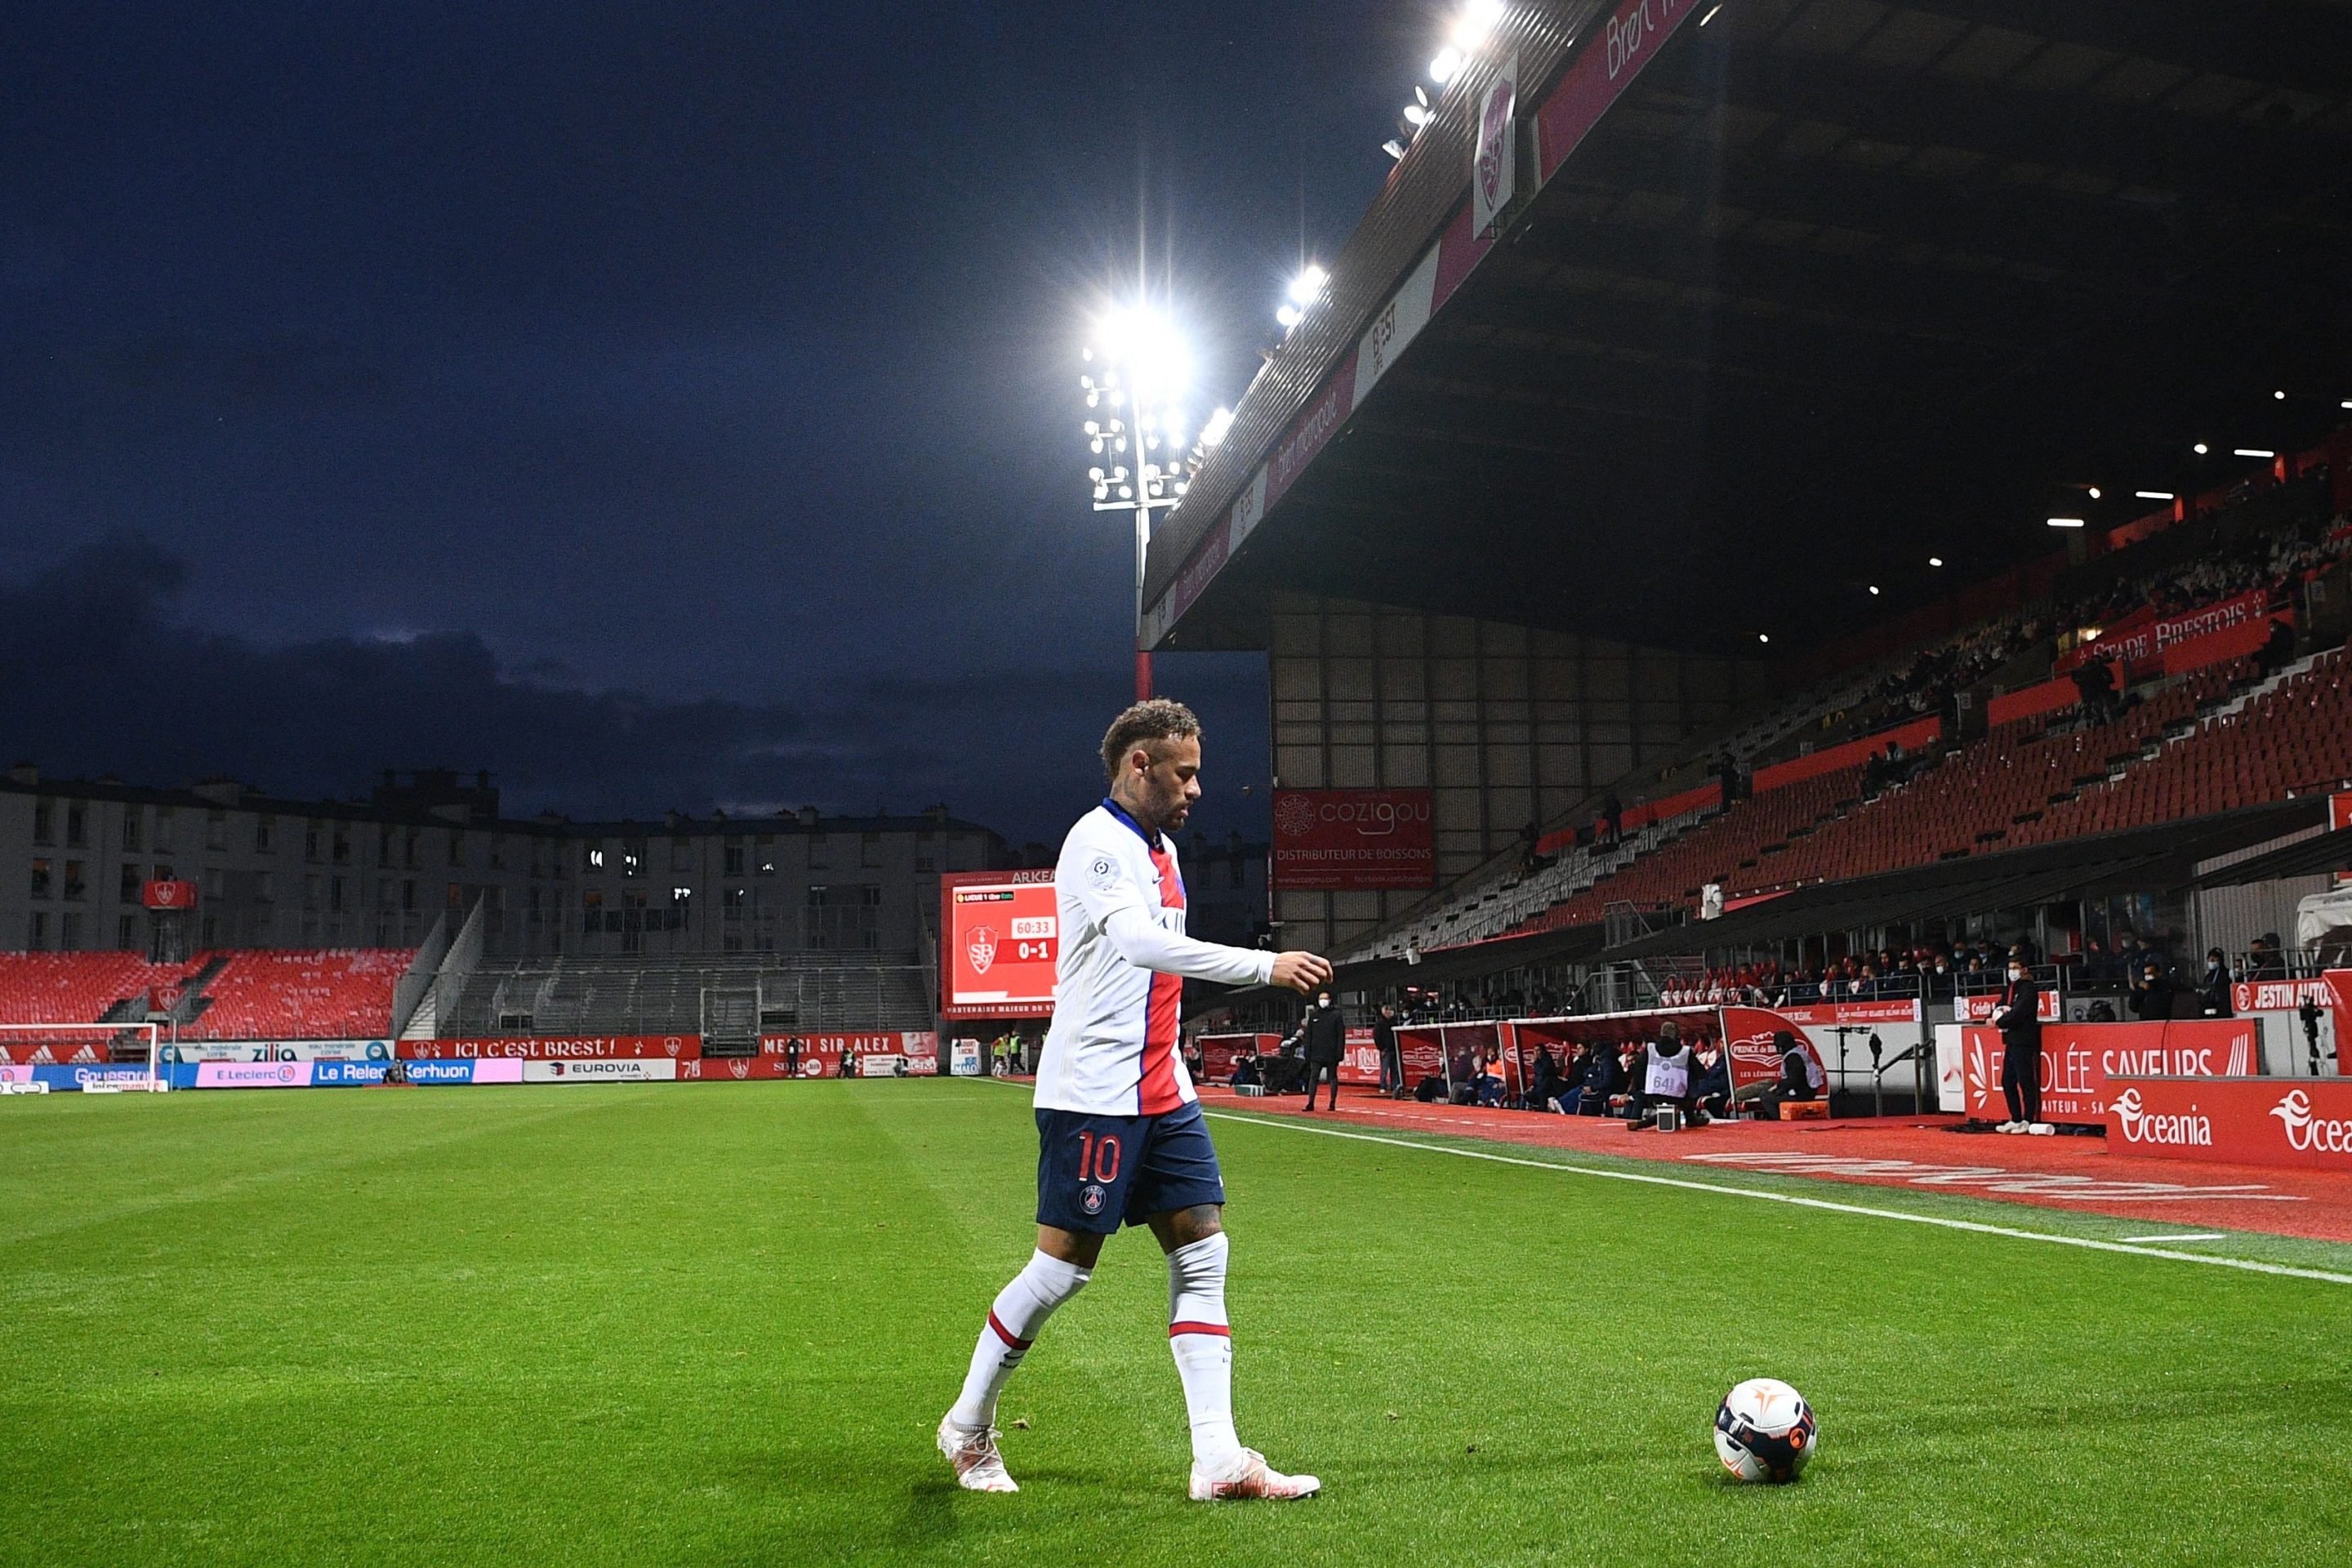 Paris Saint-Germain's Brazilian forward Neymar controls the ball during the French L1 football match between Brest and Paris Saint-Germain at the Stade Francis-Le Ble stadium, in Brest, western France, on May 23, 2021.